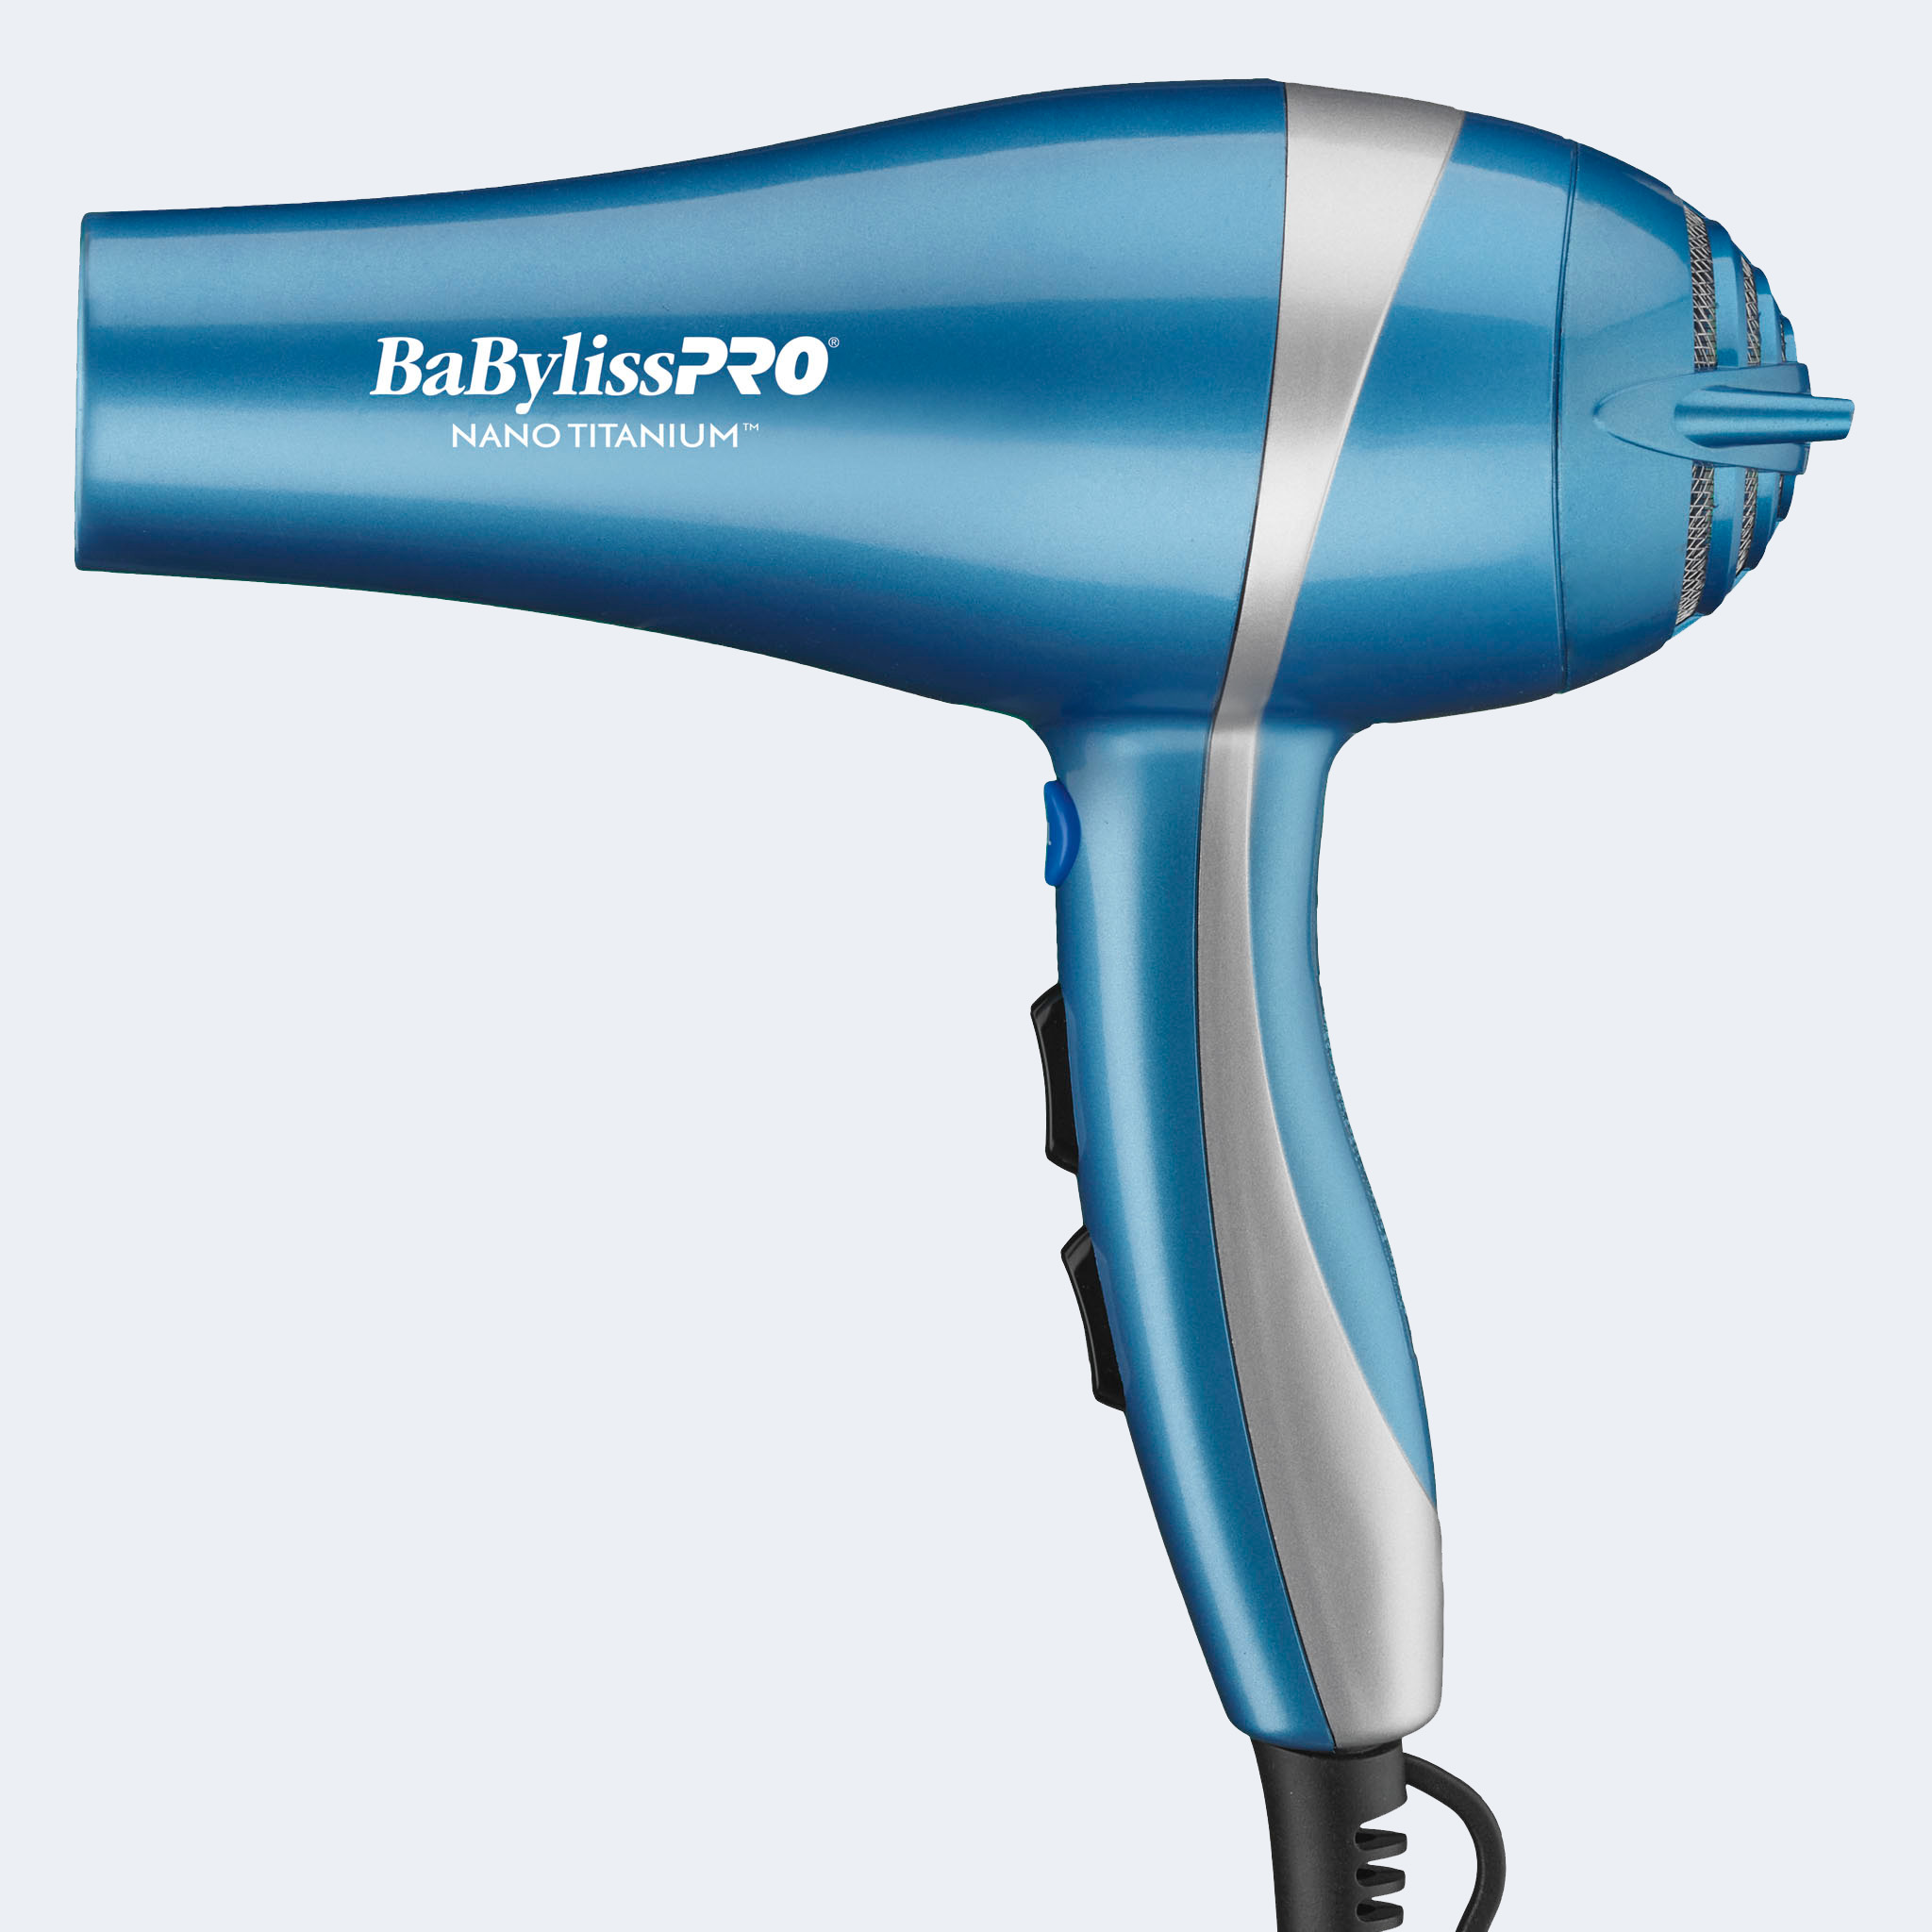 BaByliss PRO Professional Hair Dryer Collection